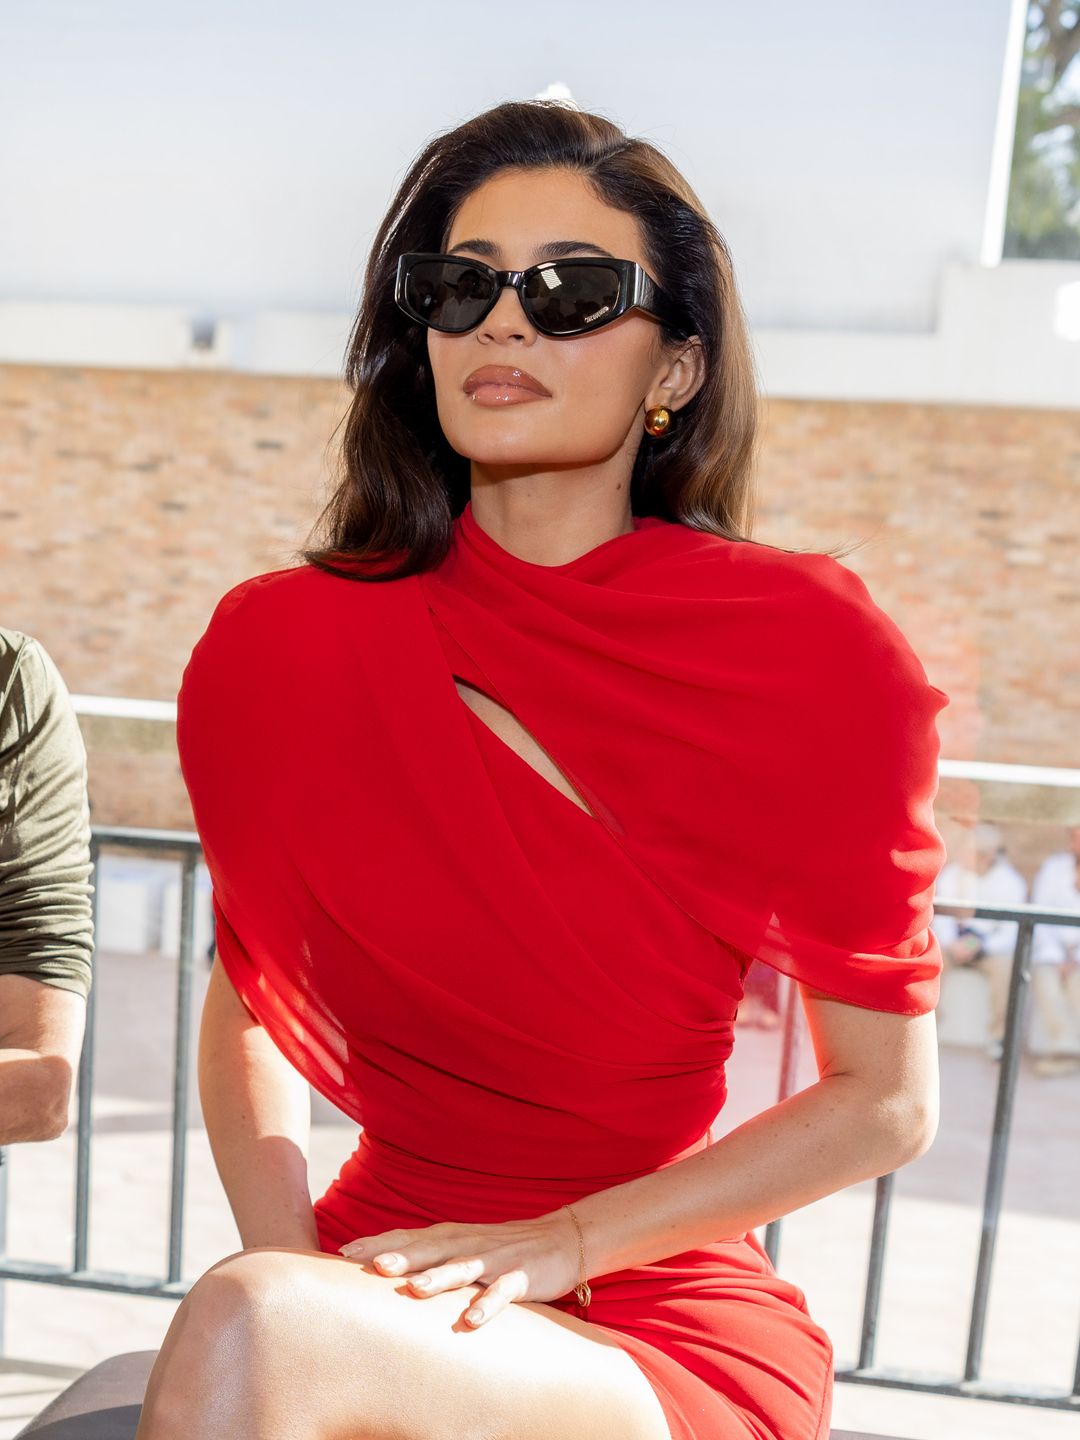 Kylie Jenner attends the "Les Sculptures" Jacquemus' Fashion Show in a red dress and black sunglasses